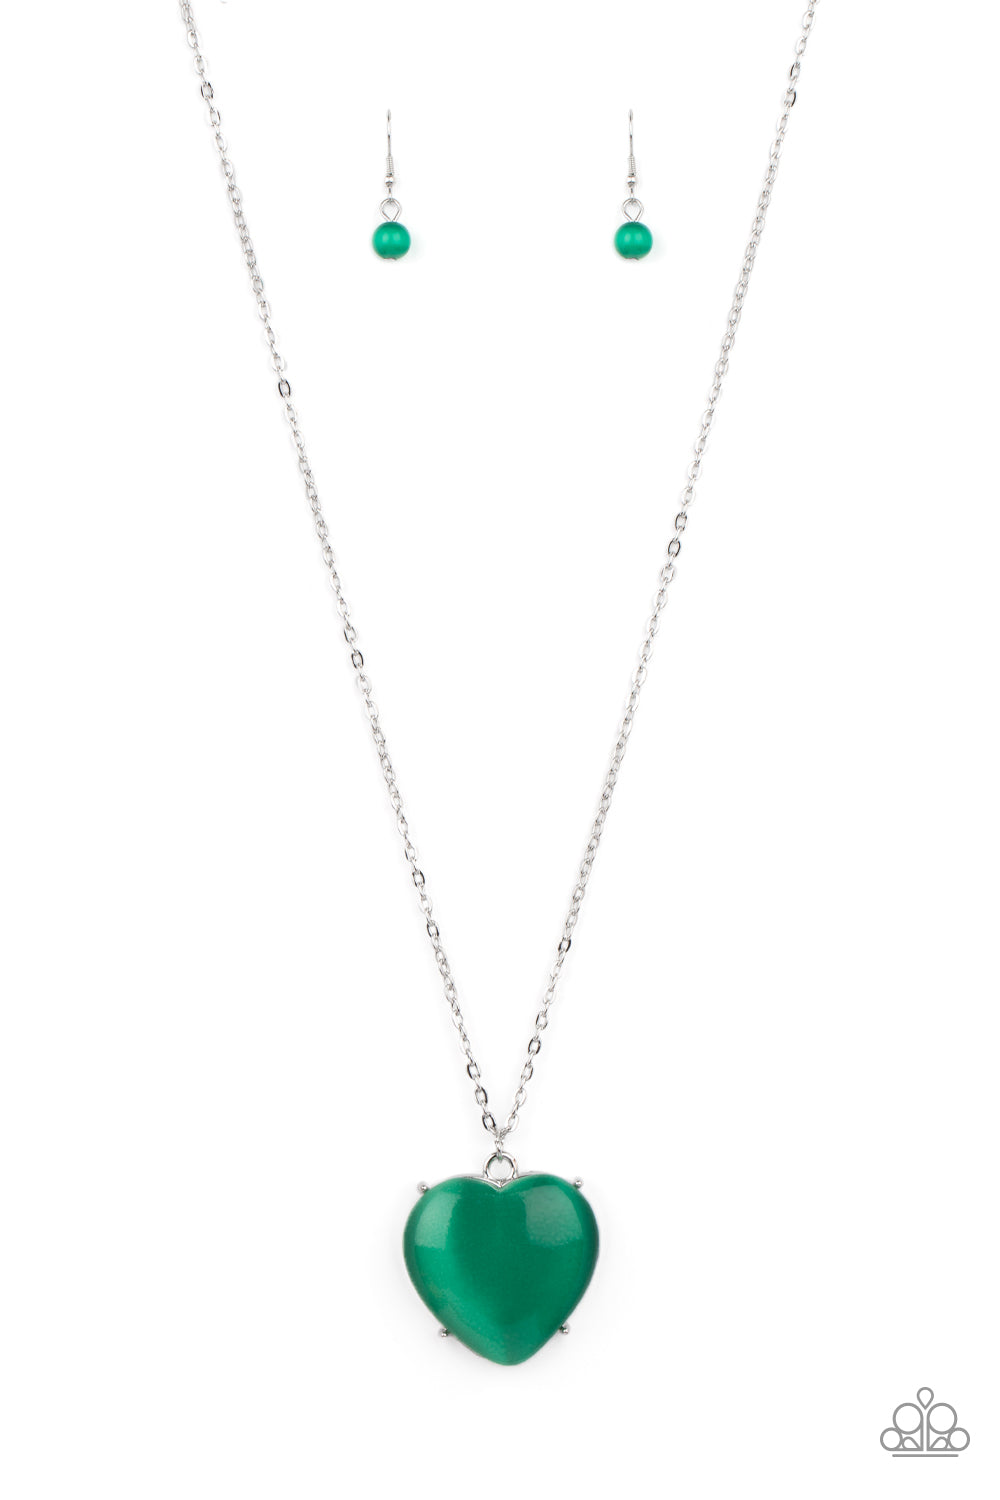 Heart Shaped Emerald Necklace in 14K Gold | Chordia Jewels